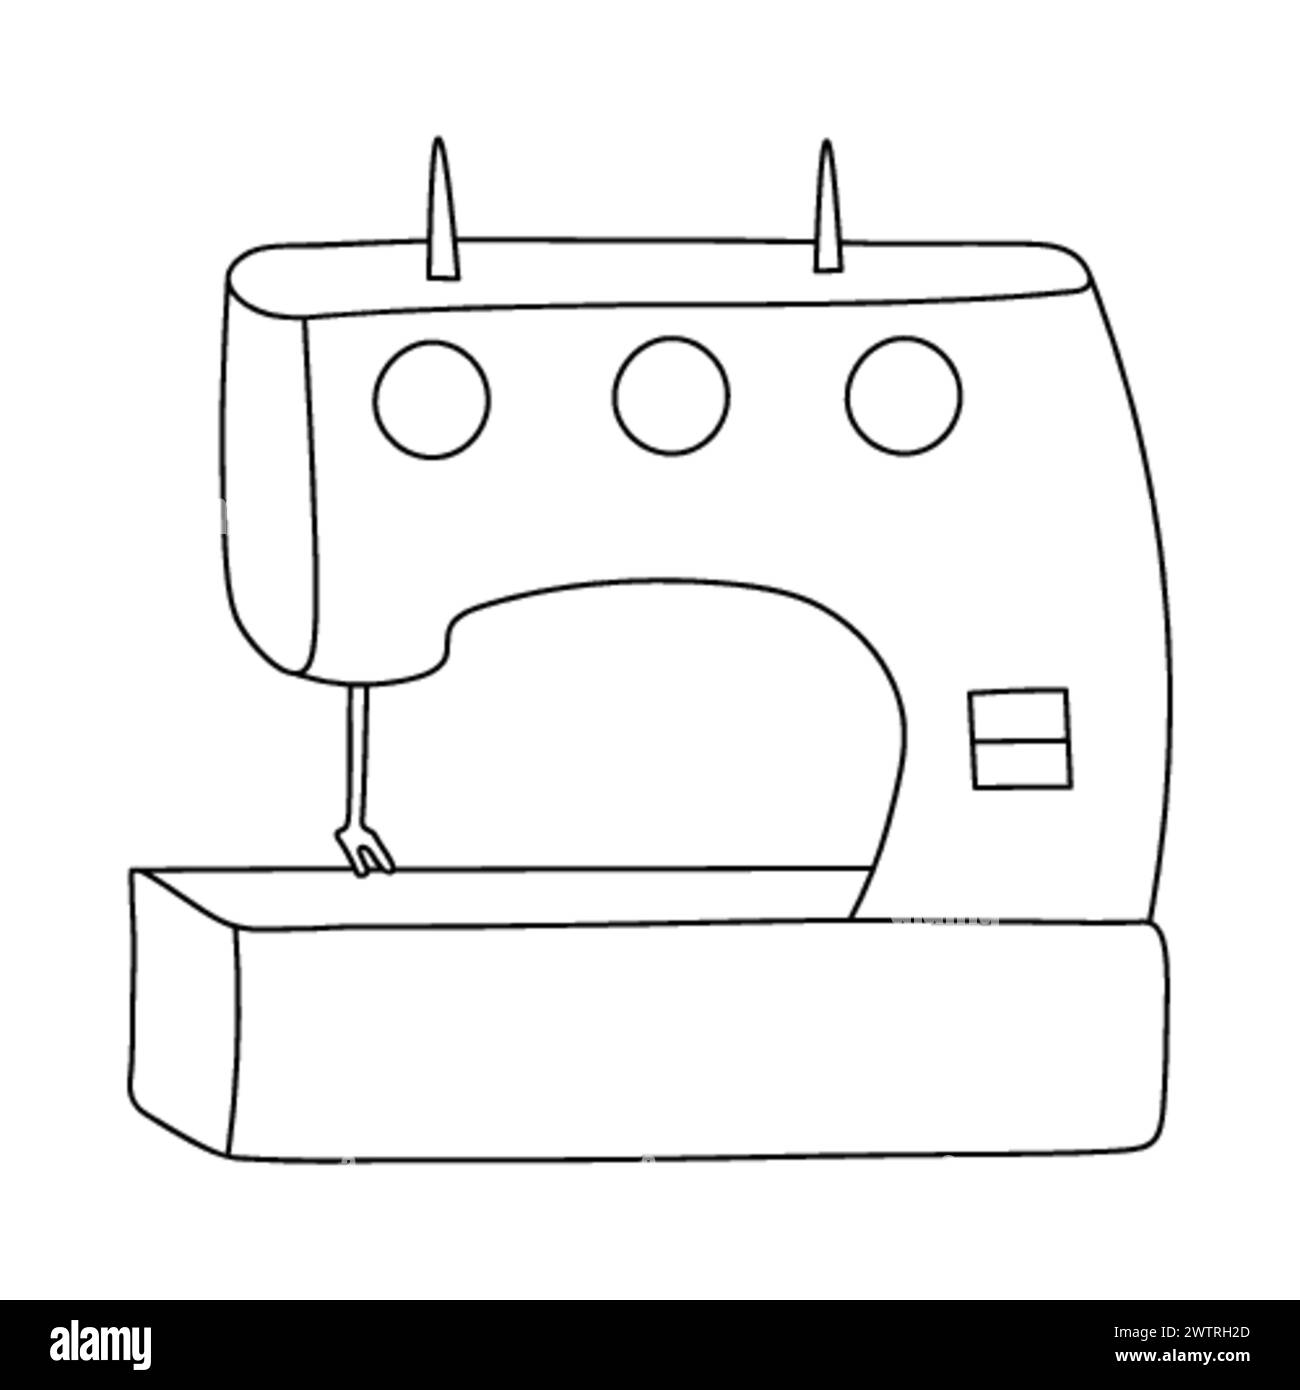 Sewing machine. Cartoon illustration of sewing machine Stock Vector